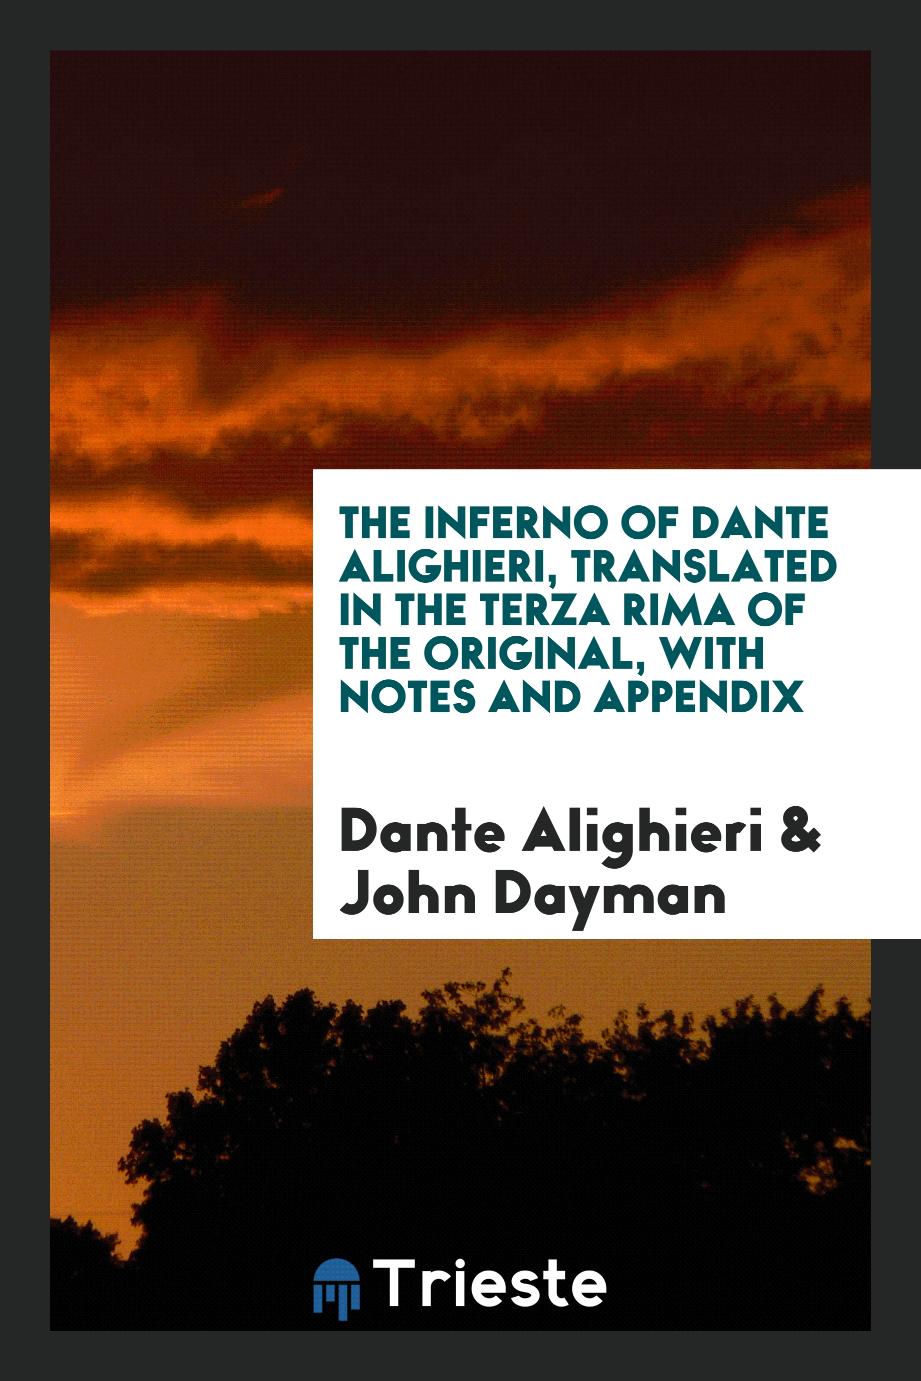 The Inferno of Dante Alighieri, Translated in the Terza Rima of the Original, with Notes and Appendix